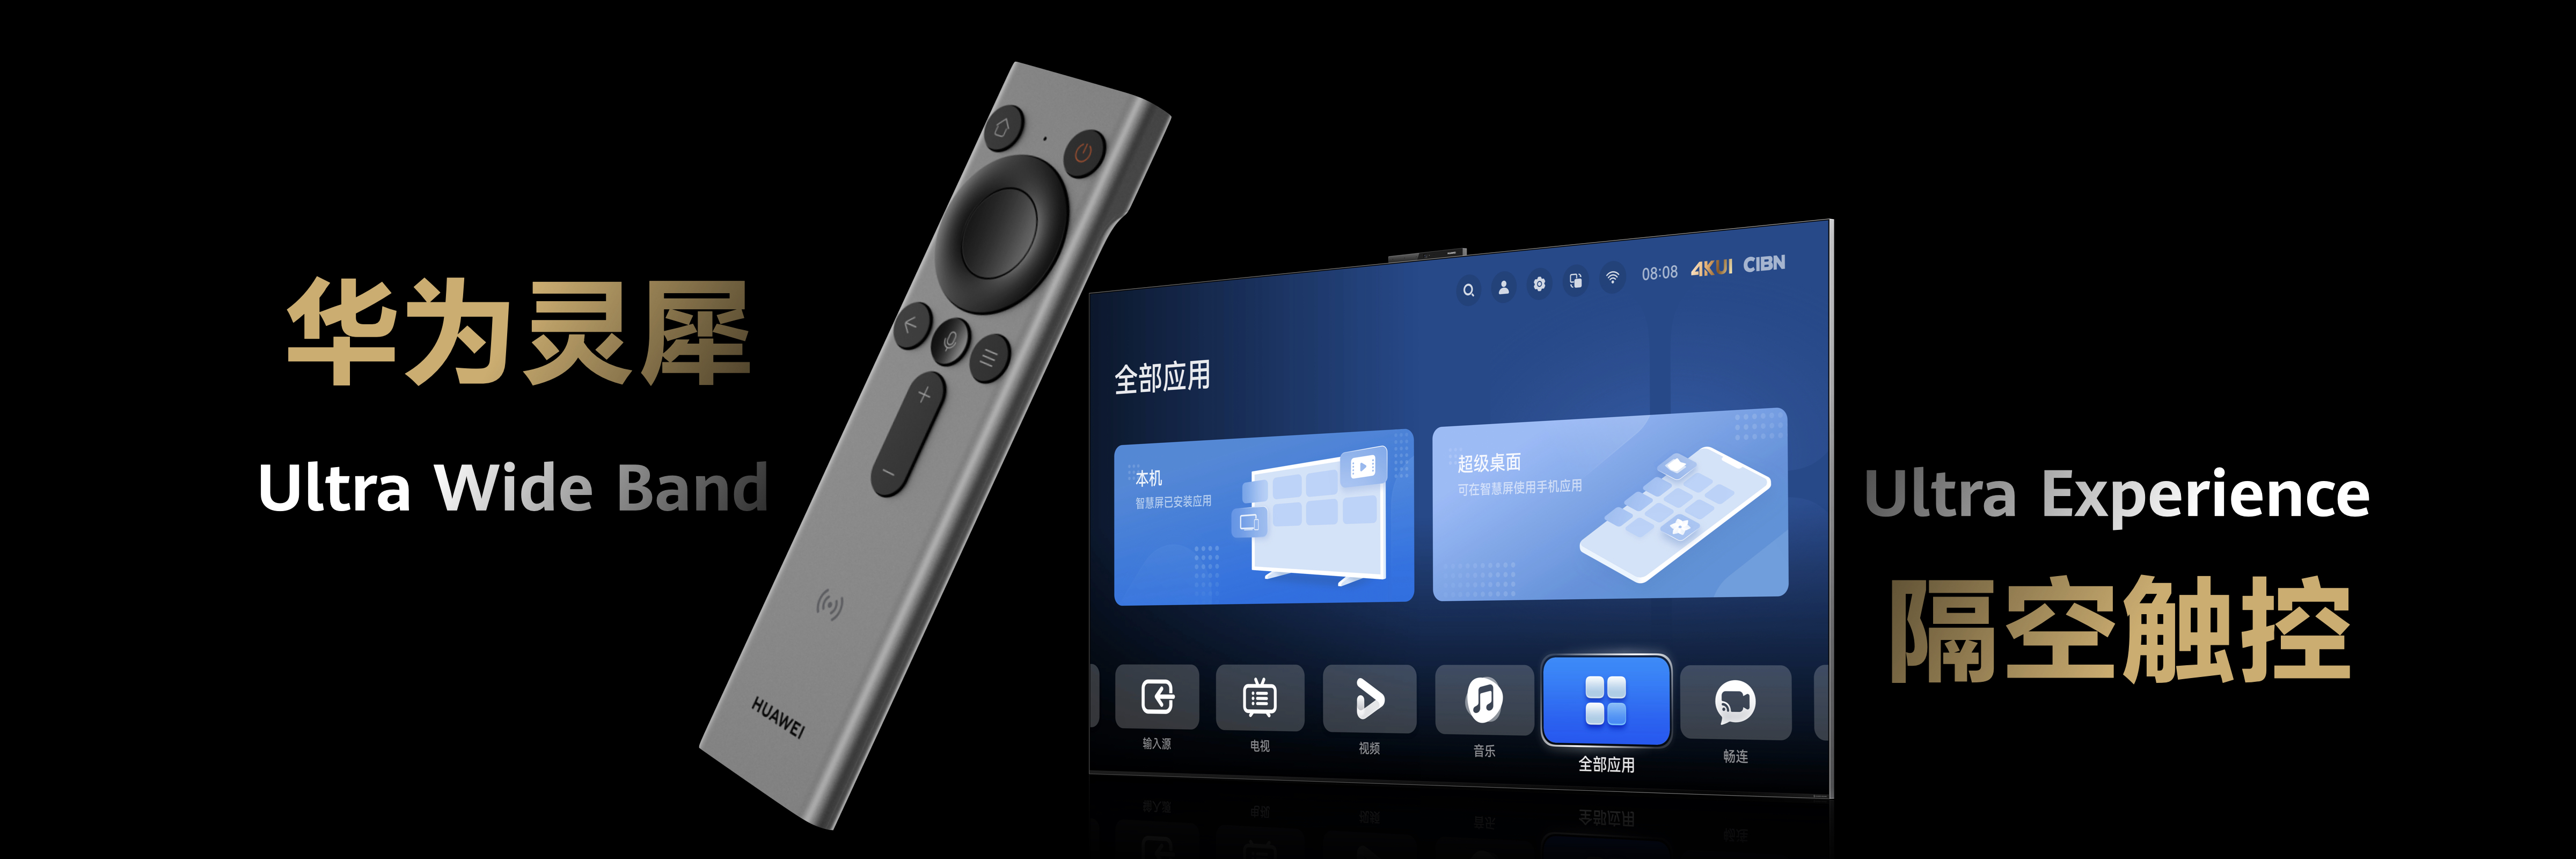 The Huawei Vision V5 Pro and its special remote. /Huawei